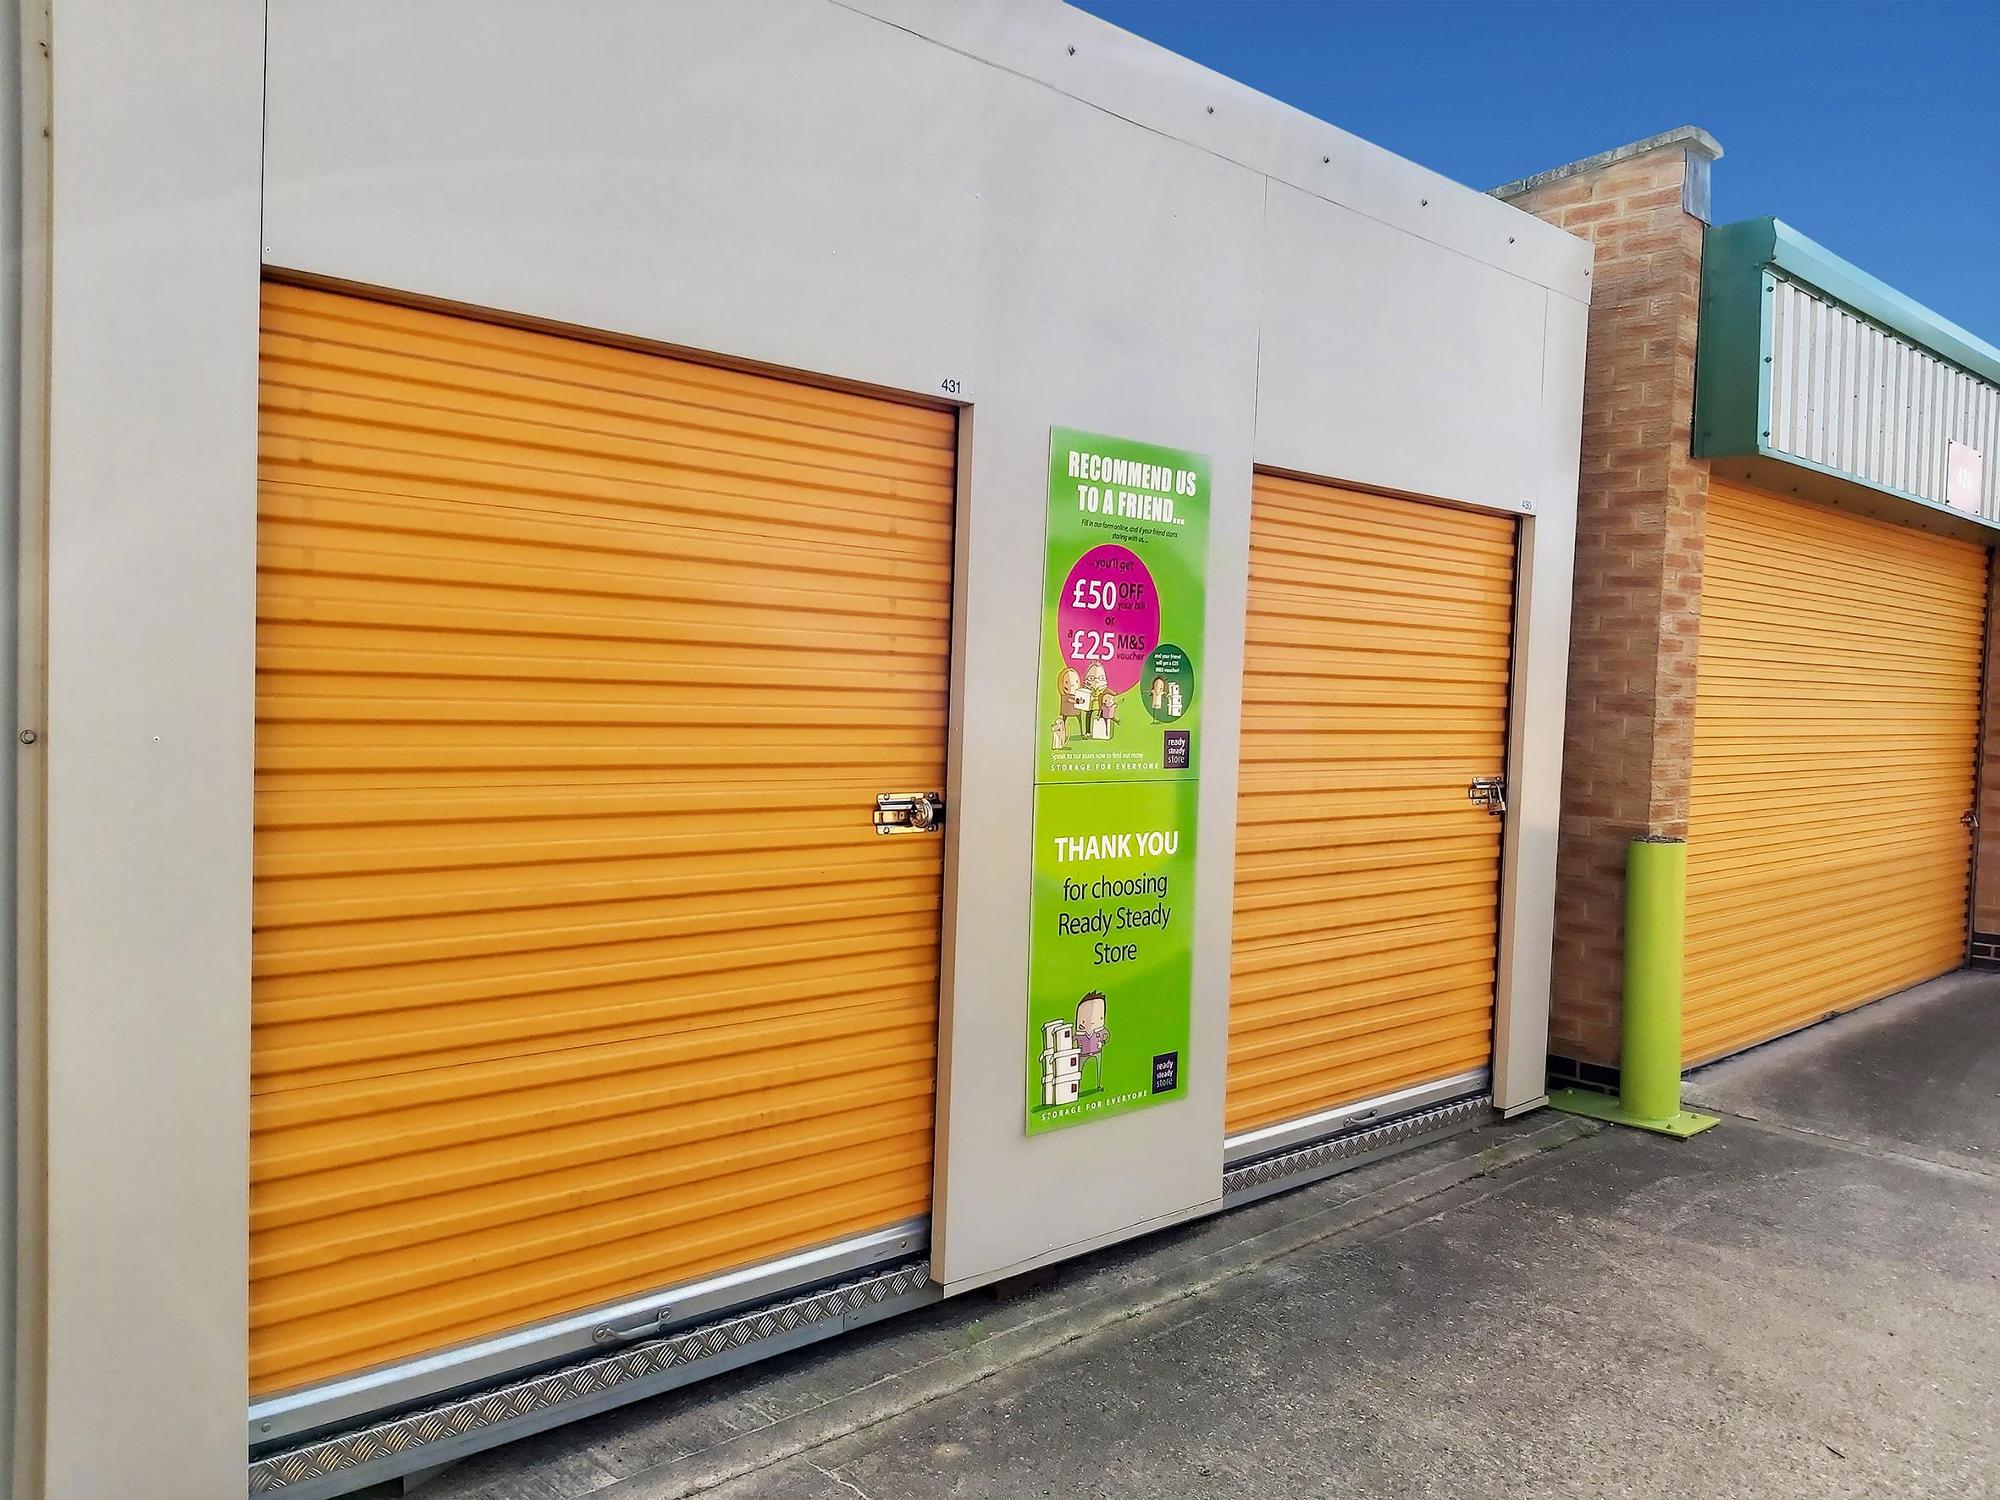 Images Ready Steady Store Self Storage Nottingham